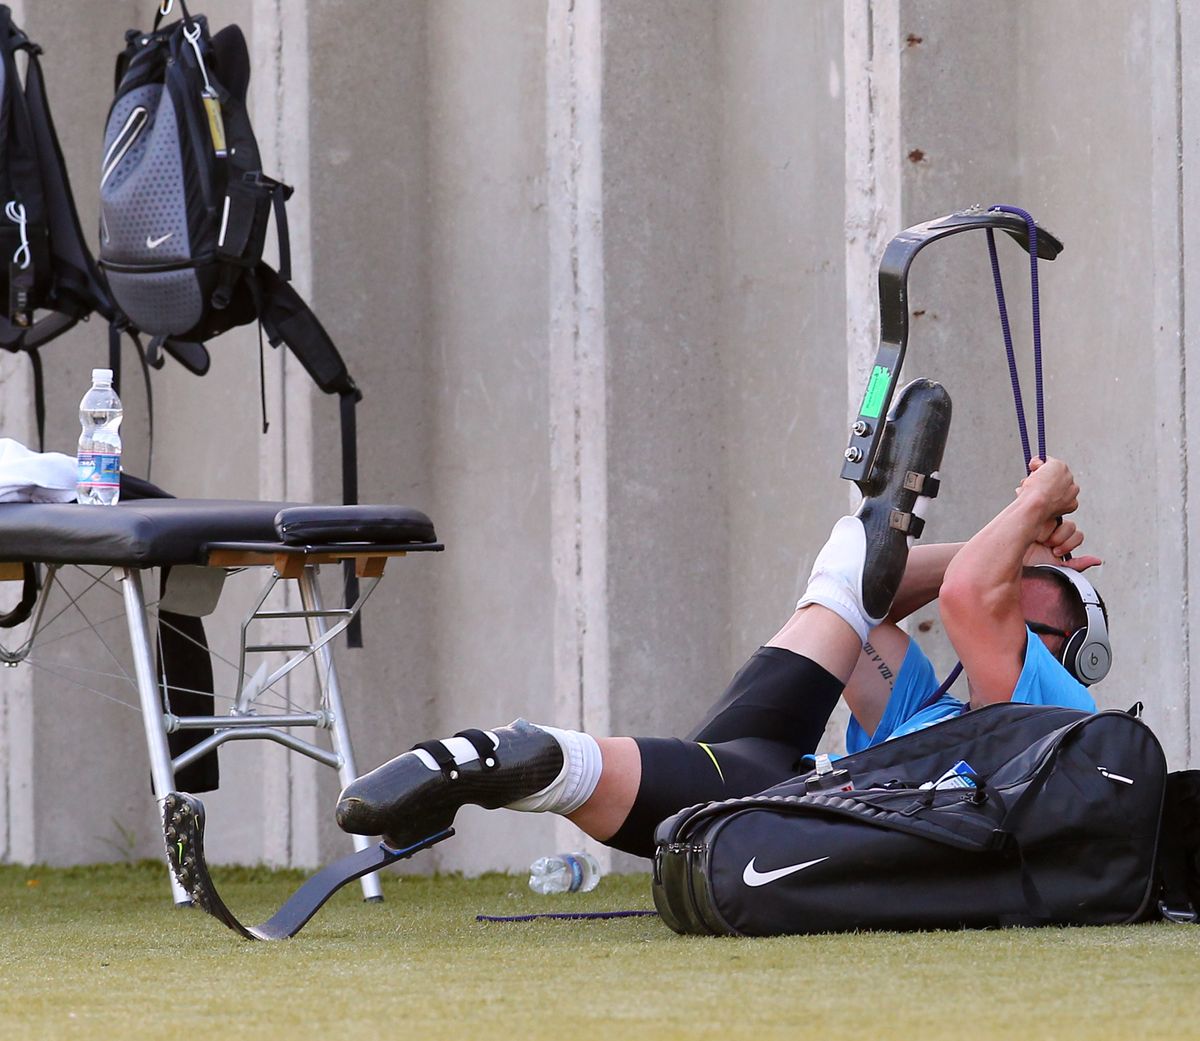 Oscar Pistorius, known as the “Blade Runner,” prepares for a training session last Tuesday in Italy. (Associated Press)